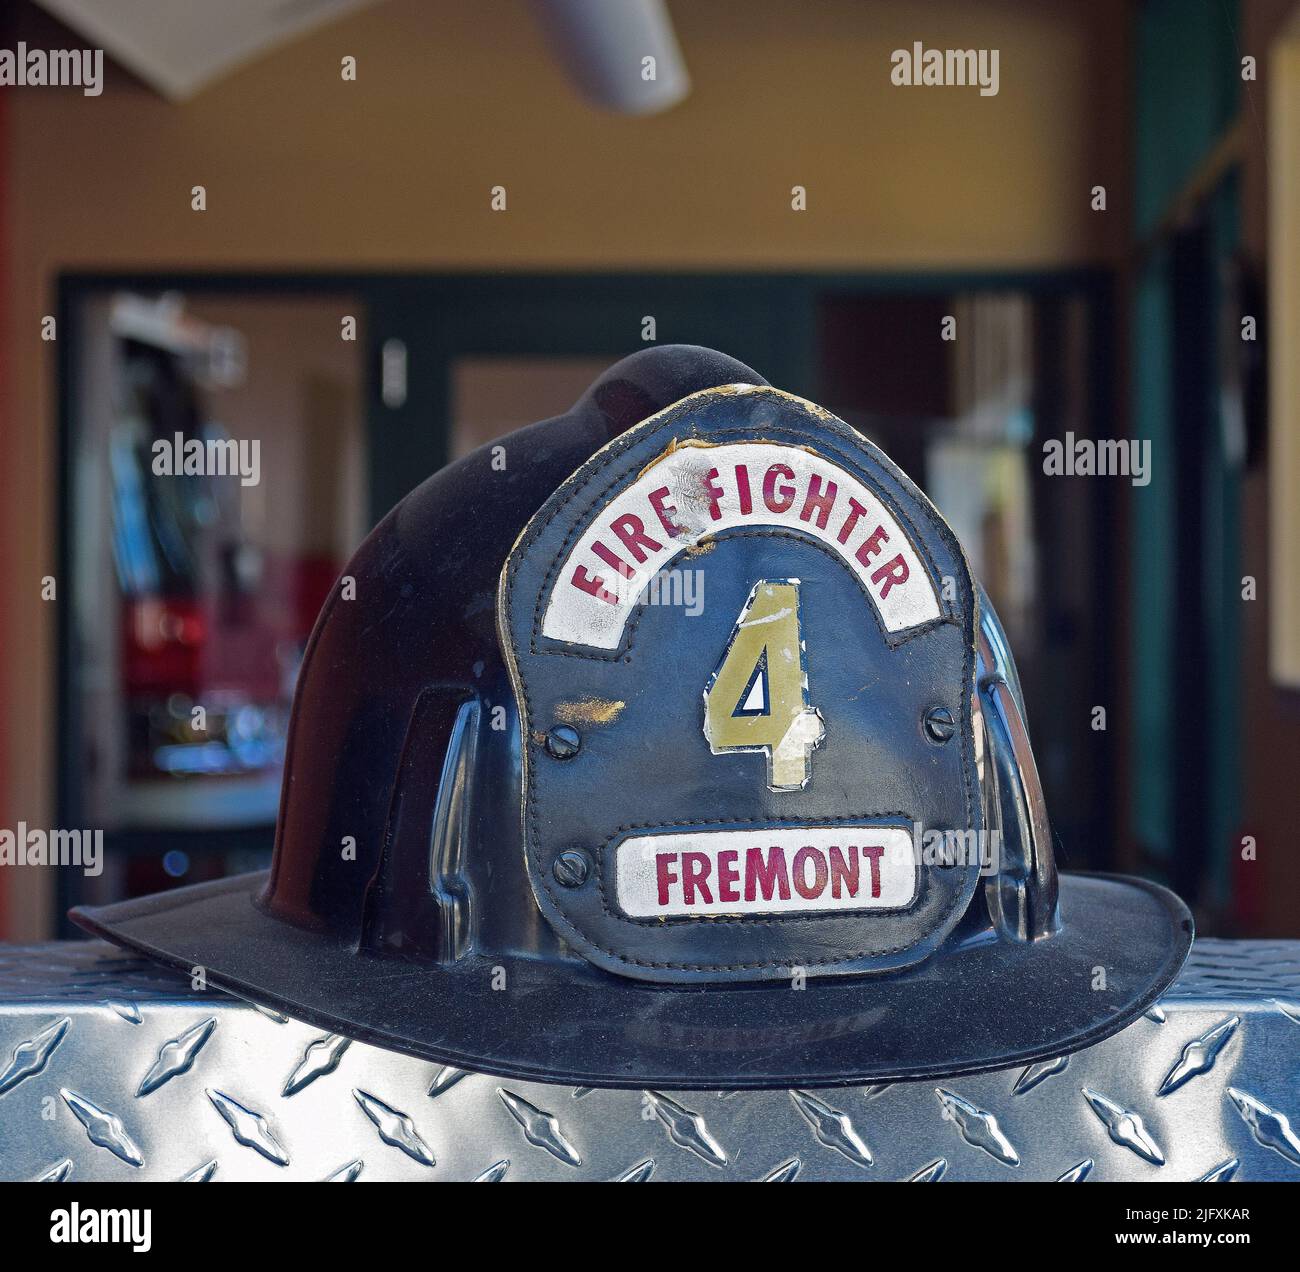 Fremont firefighter hat #4, Historic Niles District of Fremont, California Stock Photo